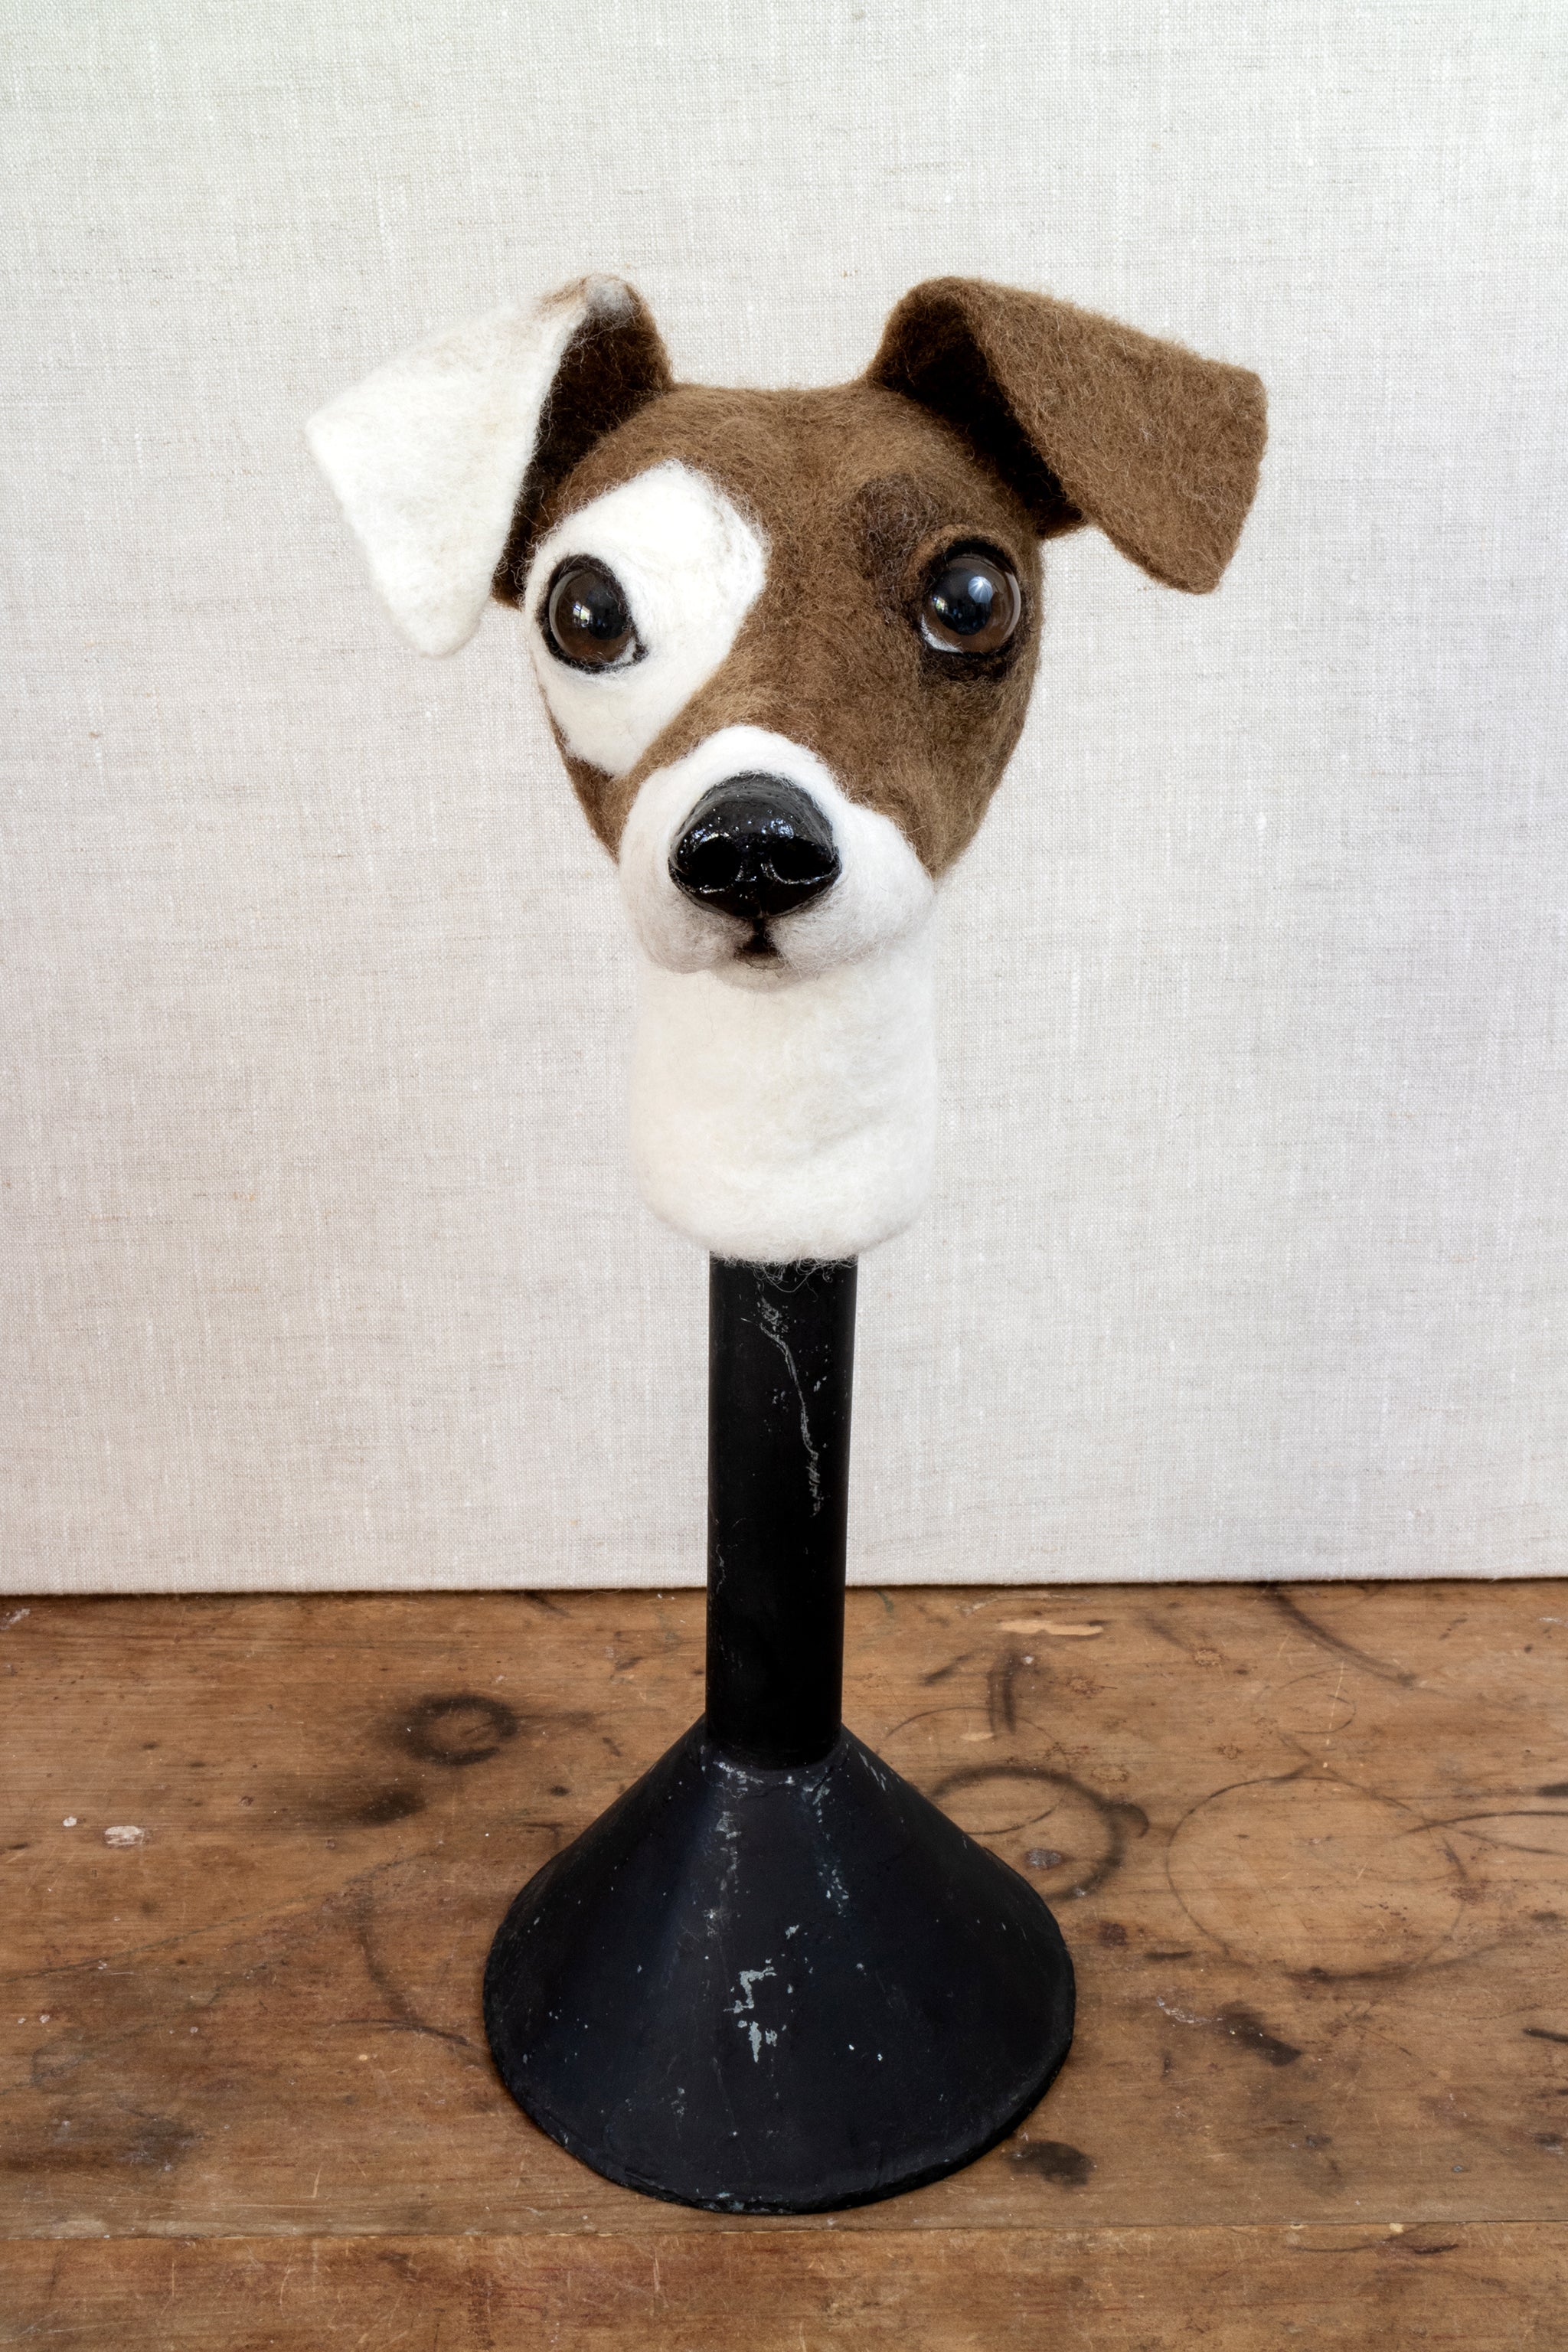 Ruthie -  Felted Jack Russell Dog Sculpture - SOLD